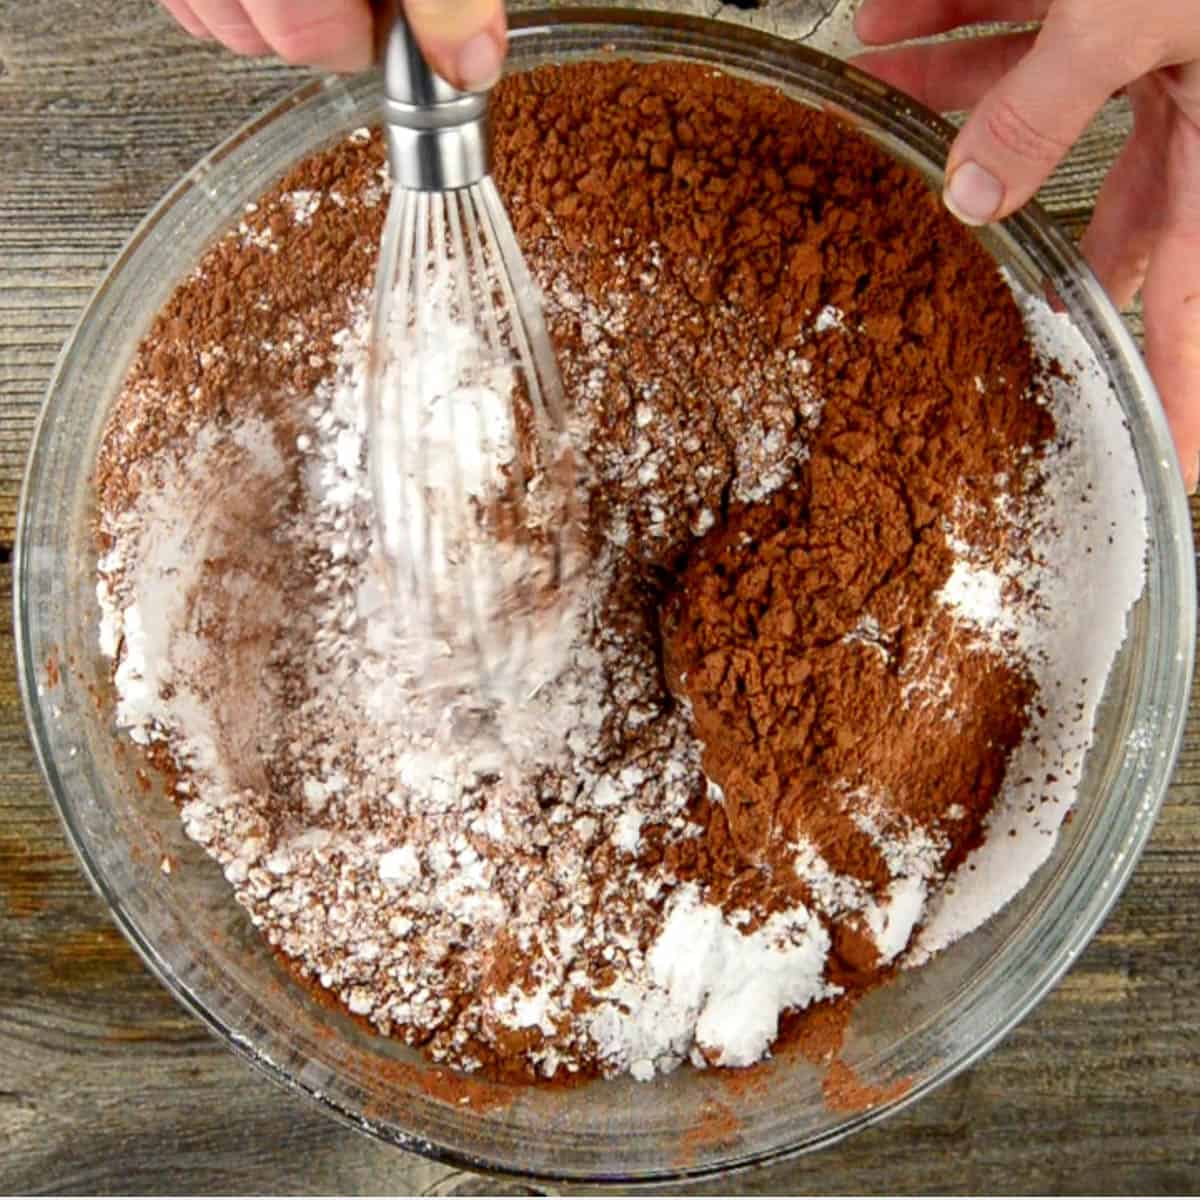 mixing cocoa powder and powdered sugar in glass bowl.